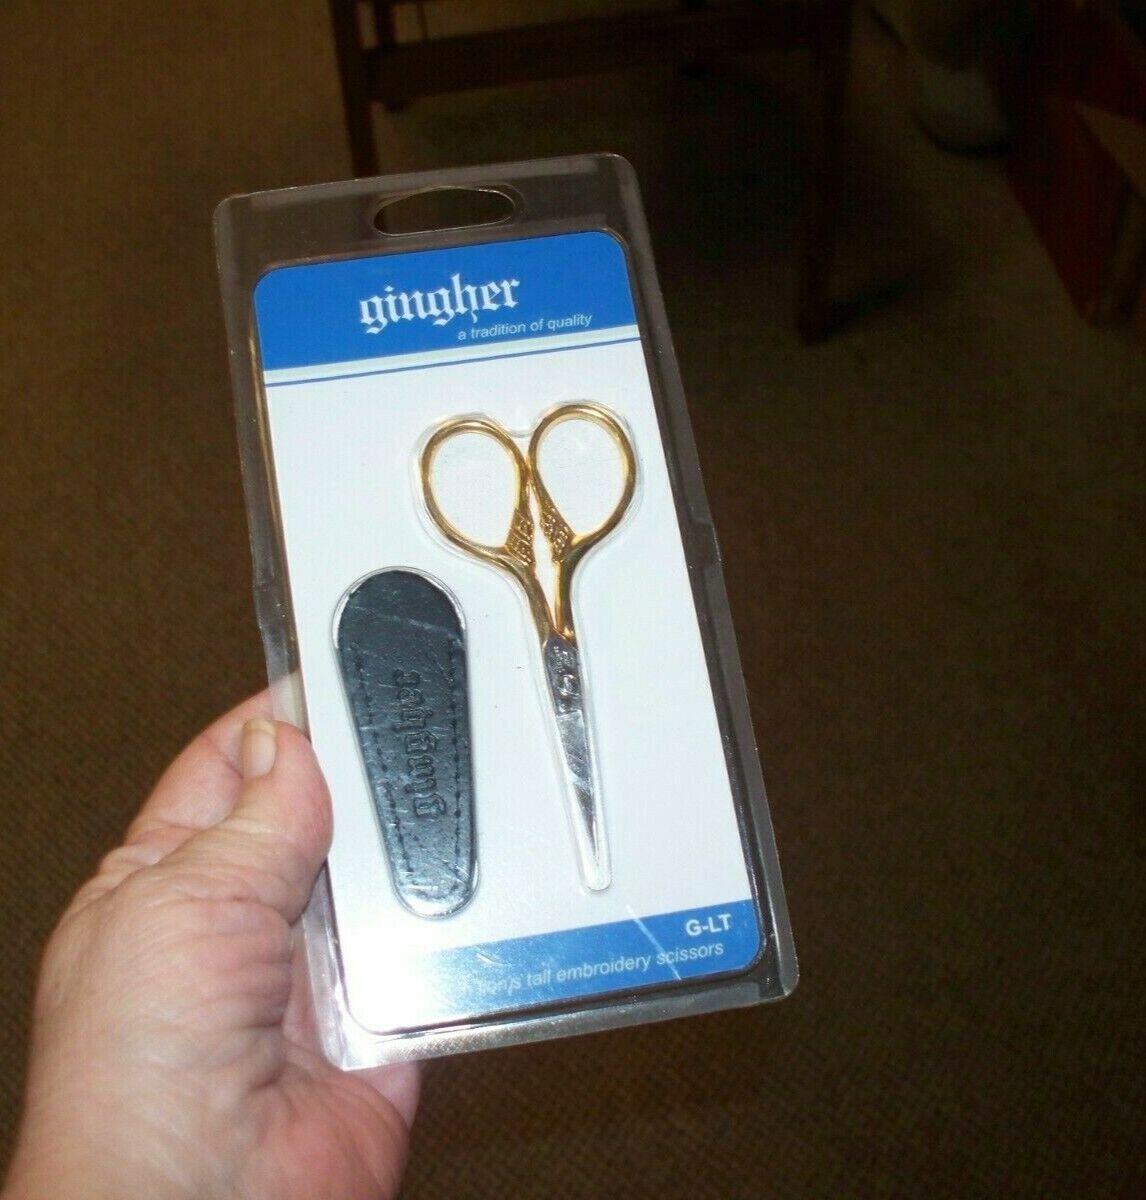 Gingher G-lt-embroidery Scissors And Case-mip- Italy-gold Handle-liontaildesign